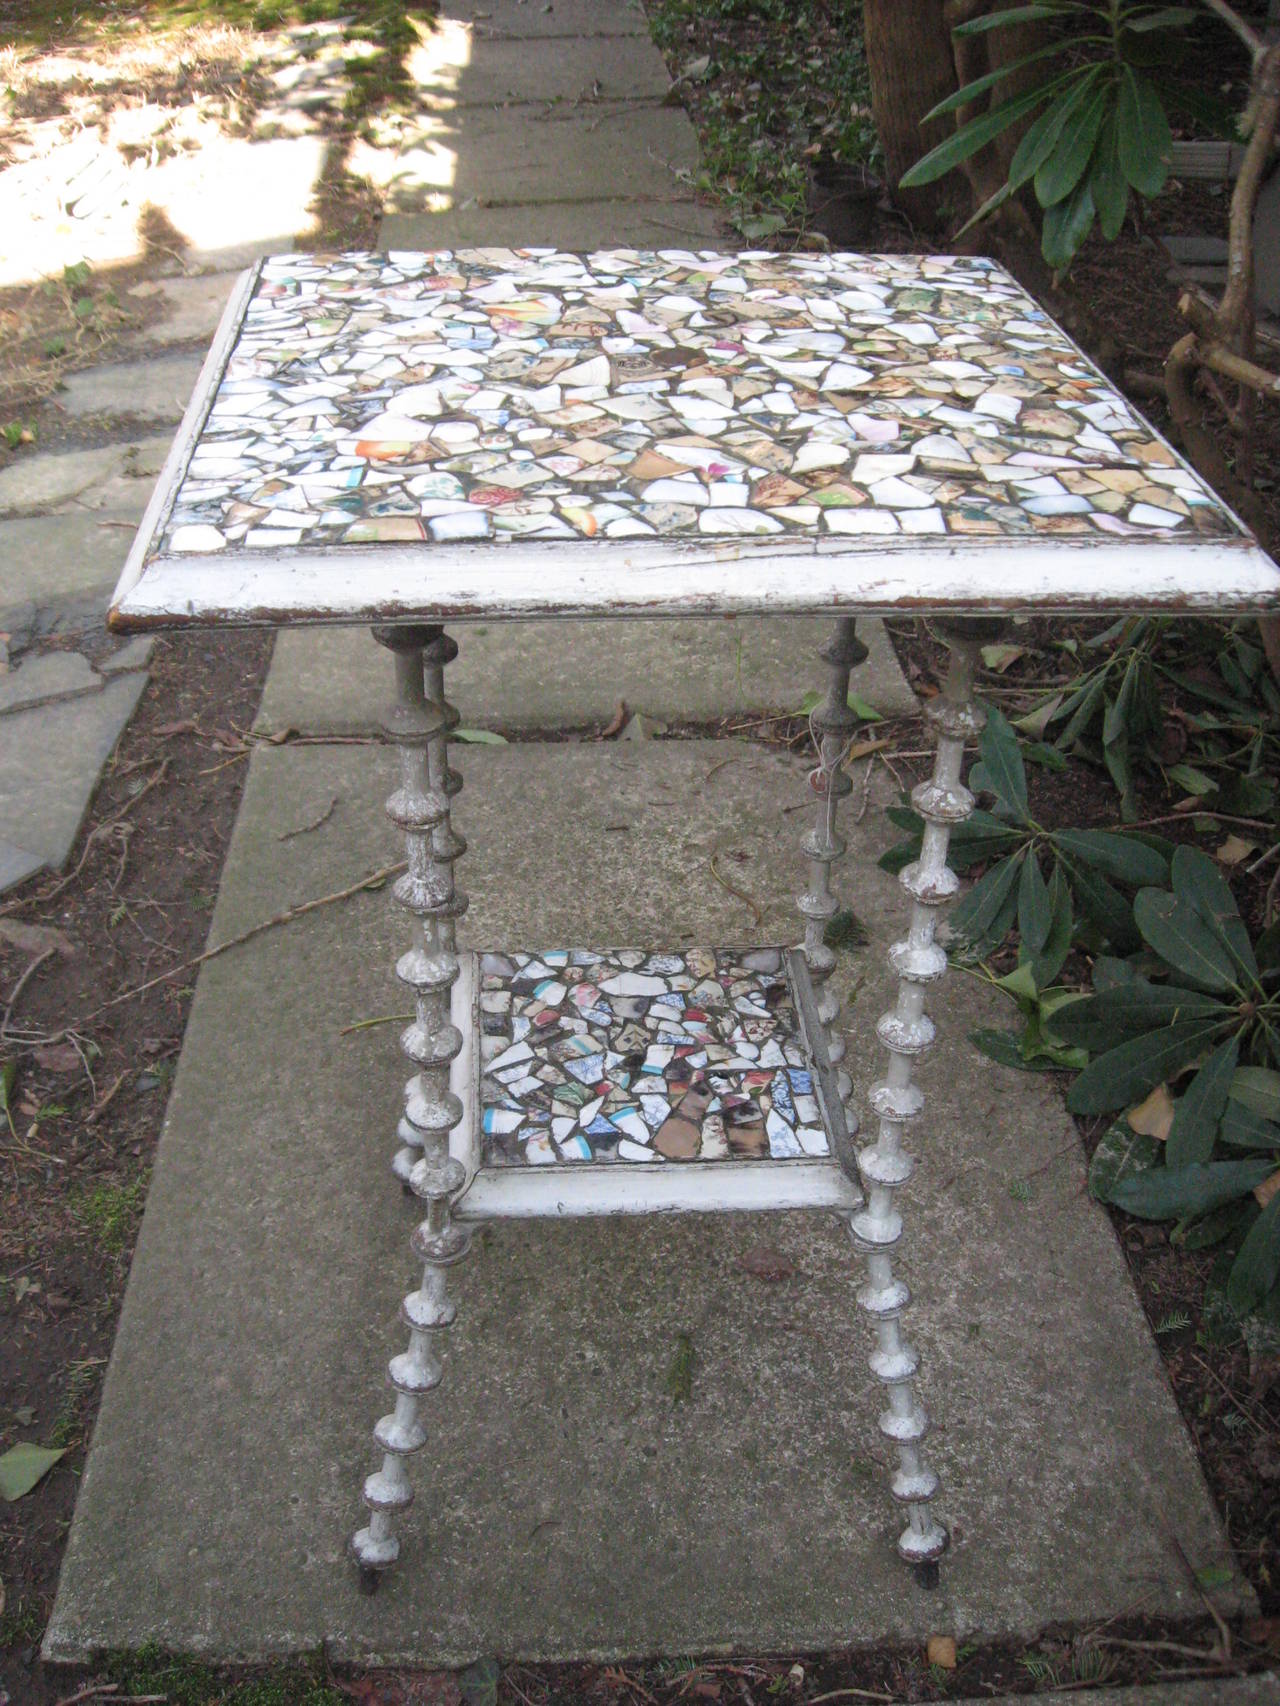 Great 19th century mosaic American two-tier tramp art spool table with antique dish pieces.